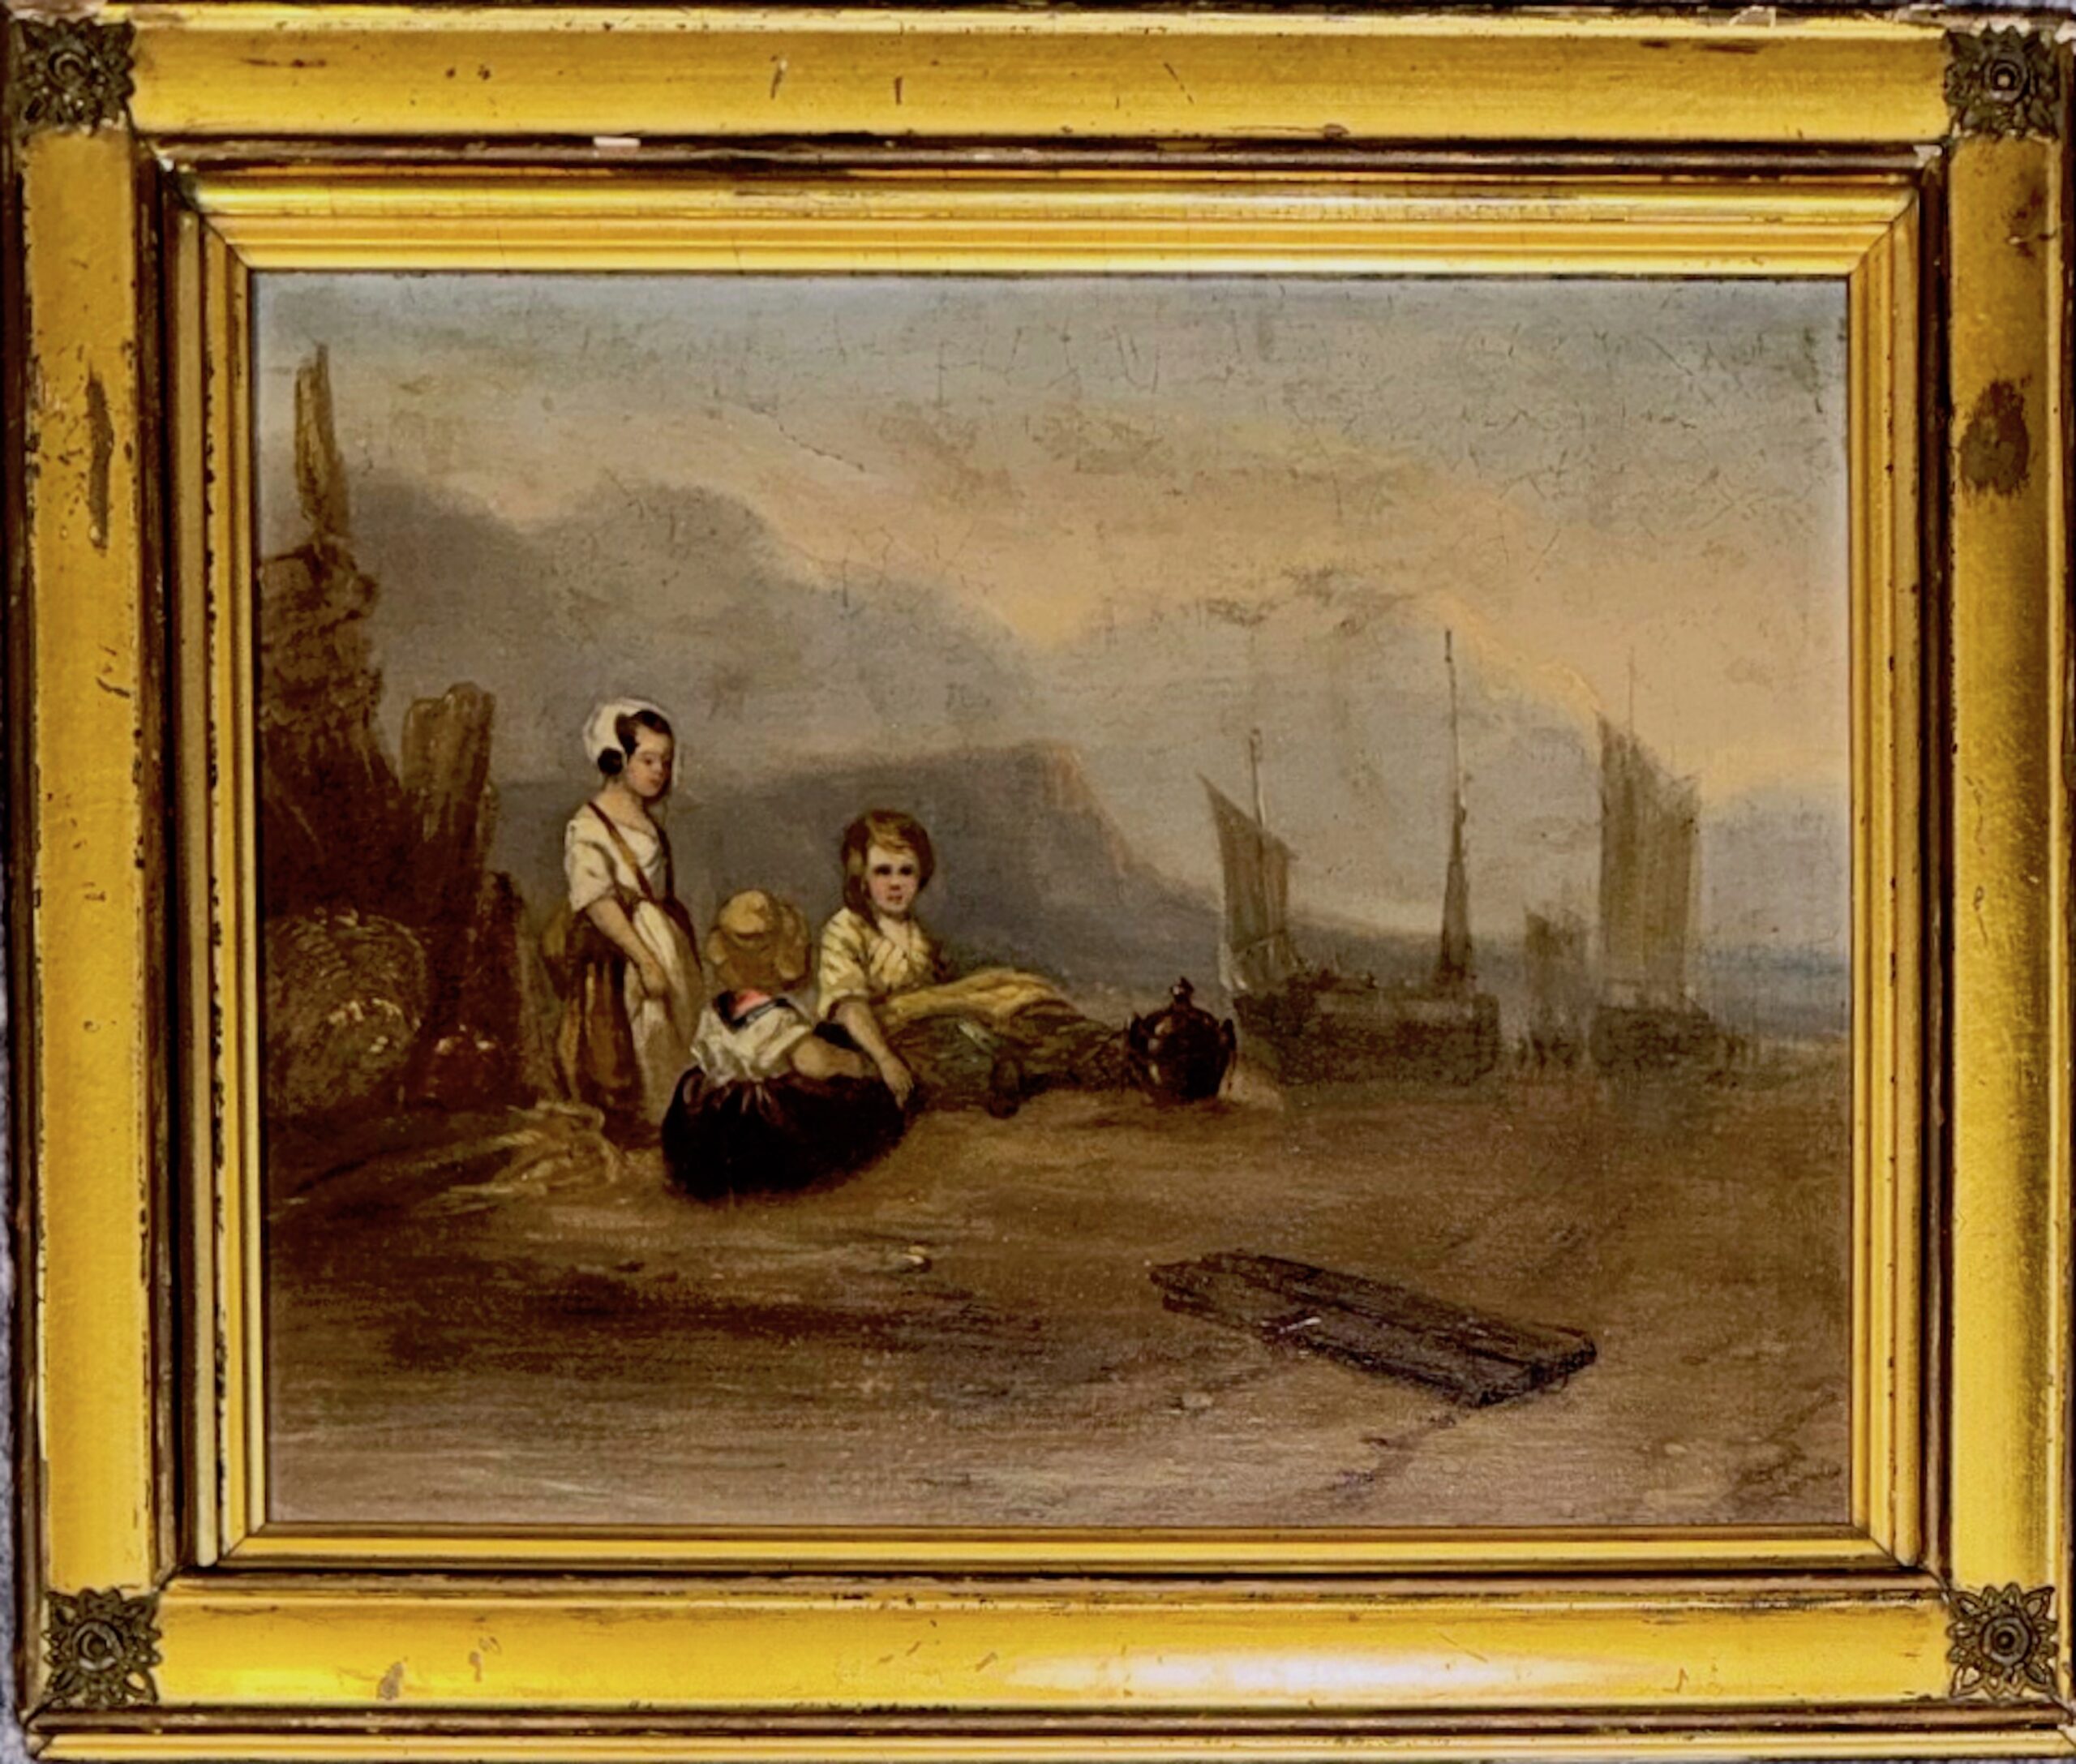 Alfred Montague, Oil Painting, c.1870s